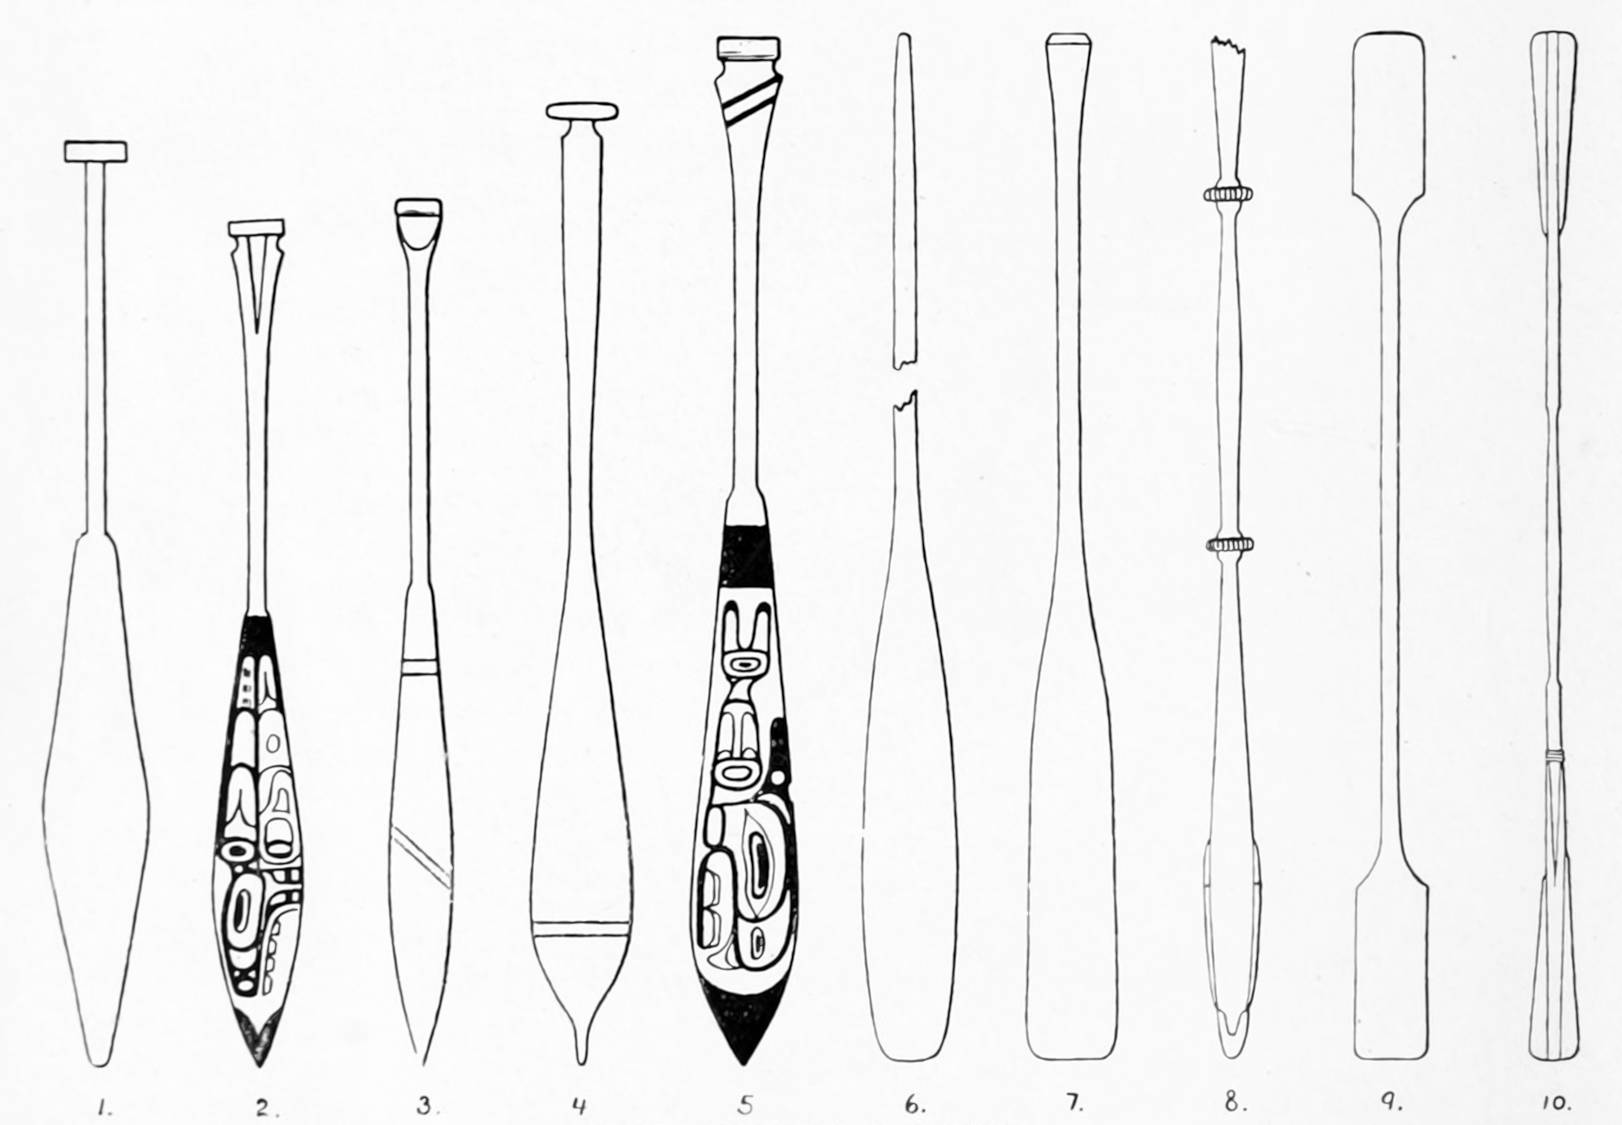  Drawing Evezők on pinterest canoe paddles , paddles and indian head